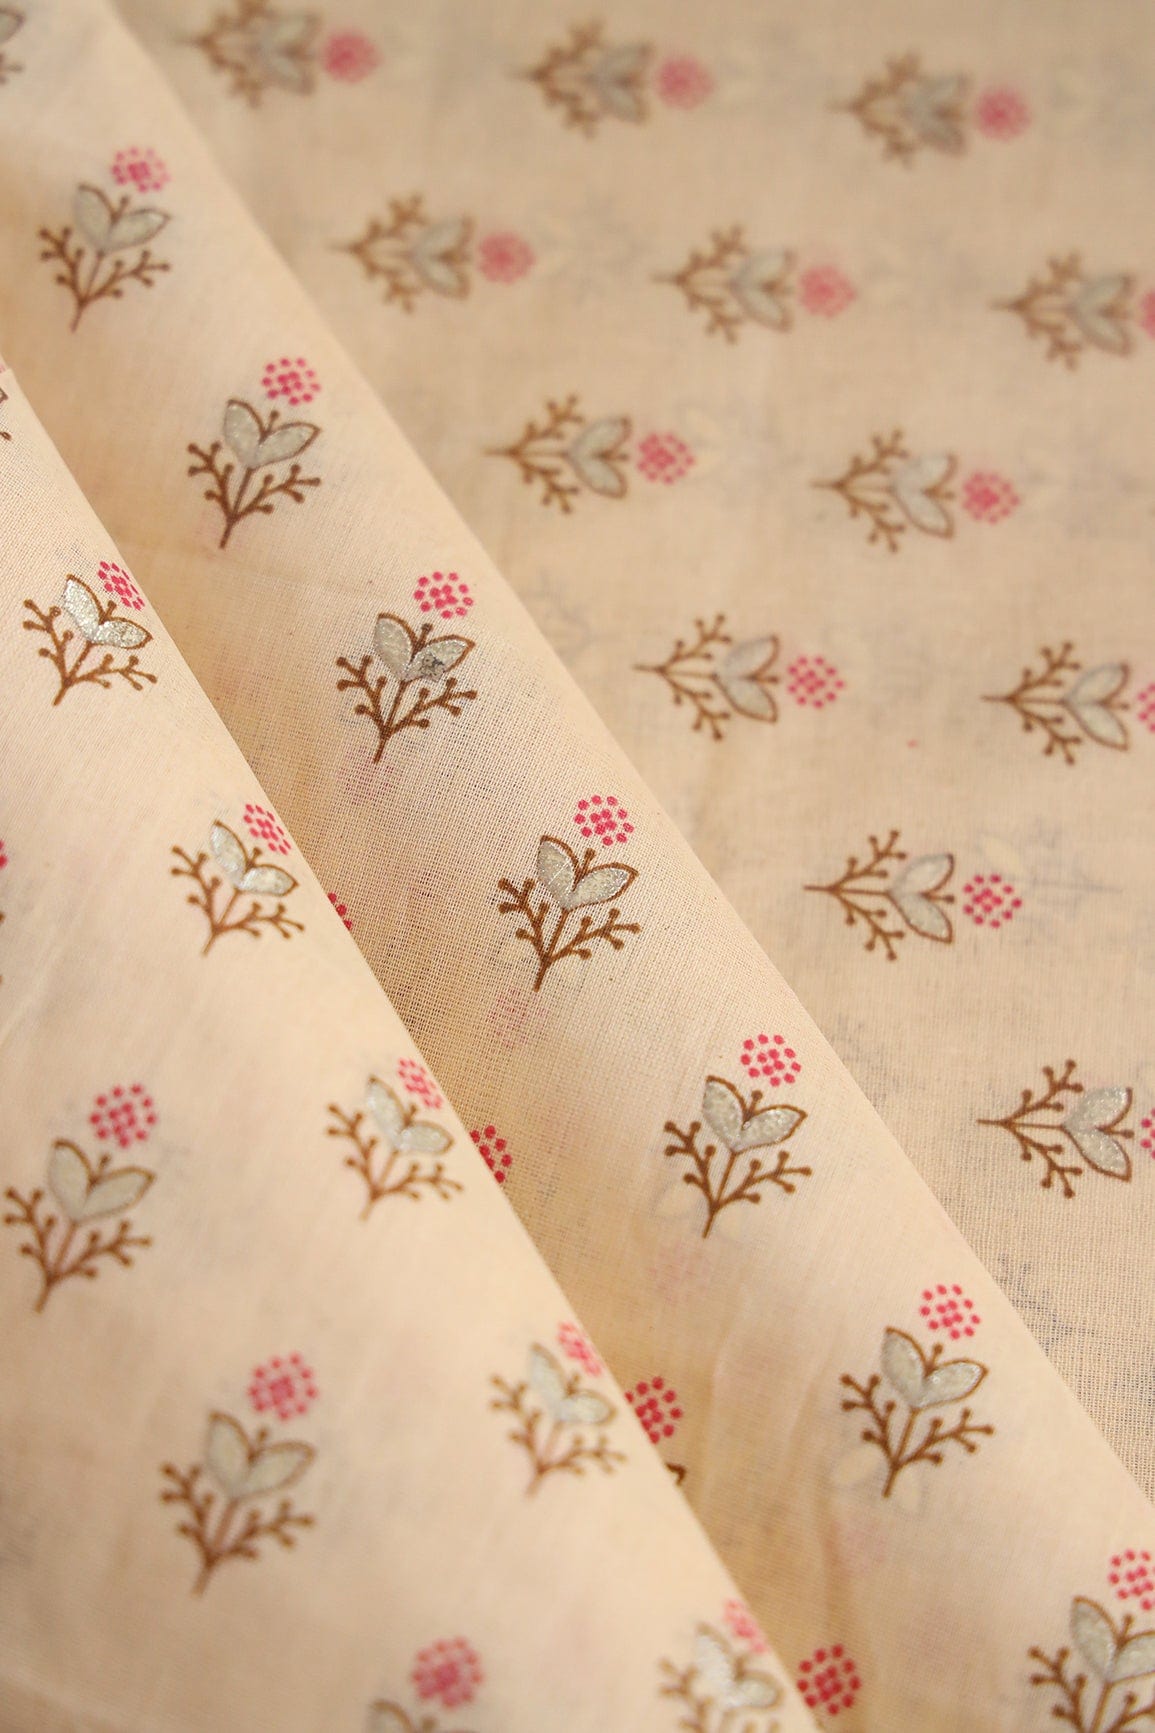 doeraa Prints Dark Pink And Brown Small Floral Booti Foil Print On Beige Organic Cotton Fabric